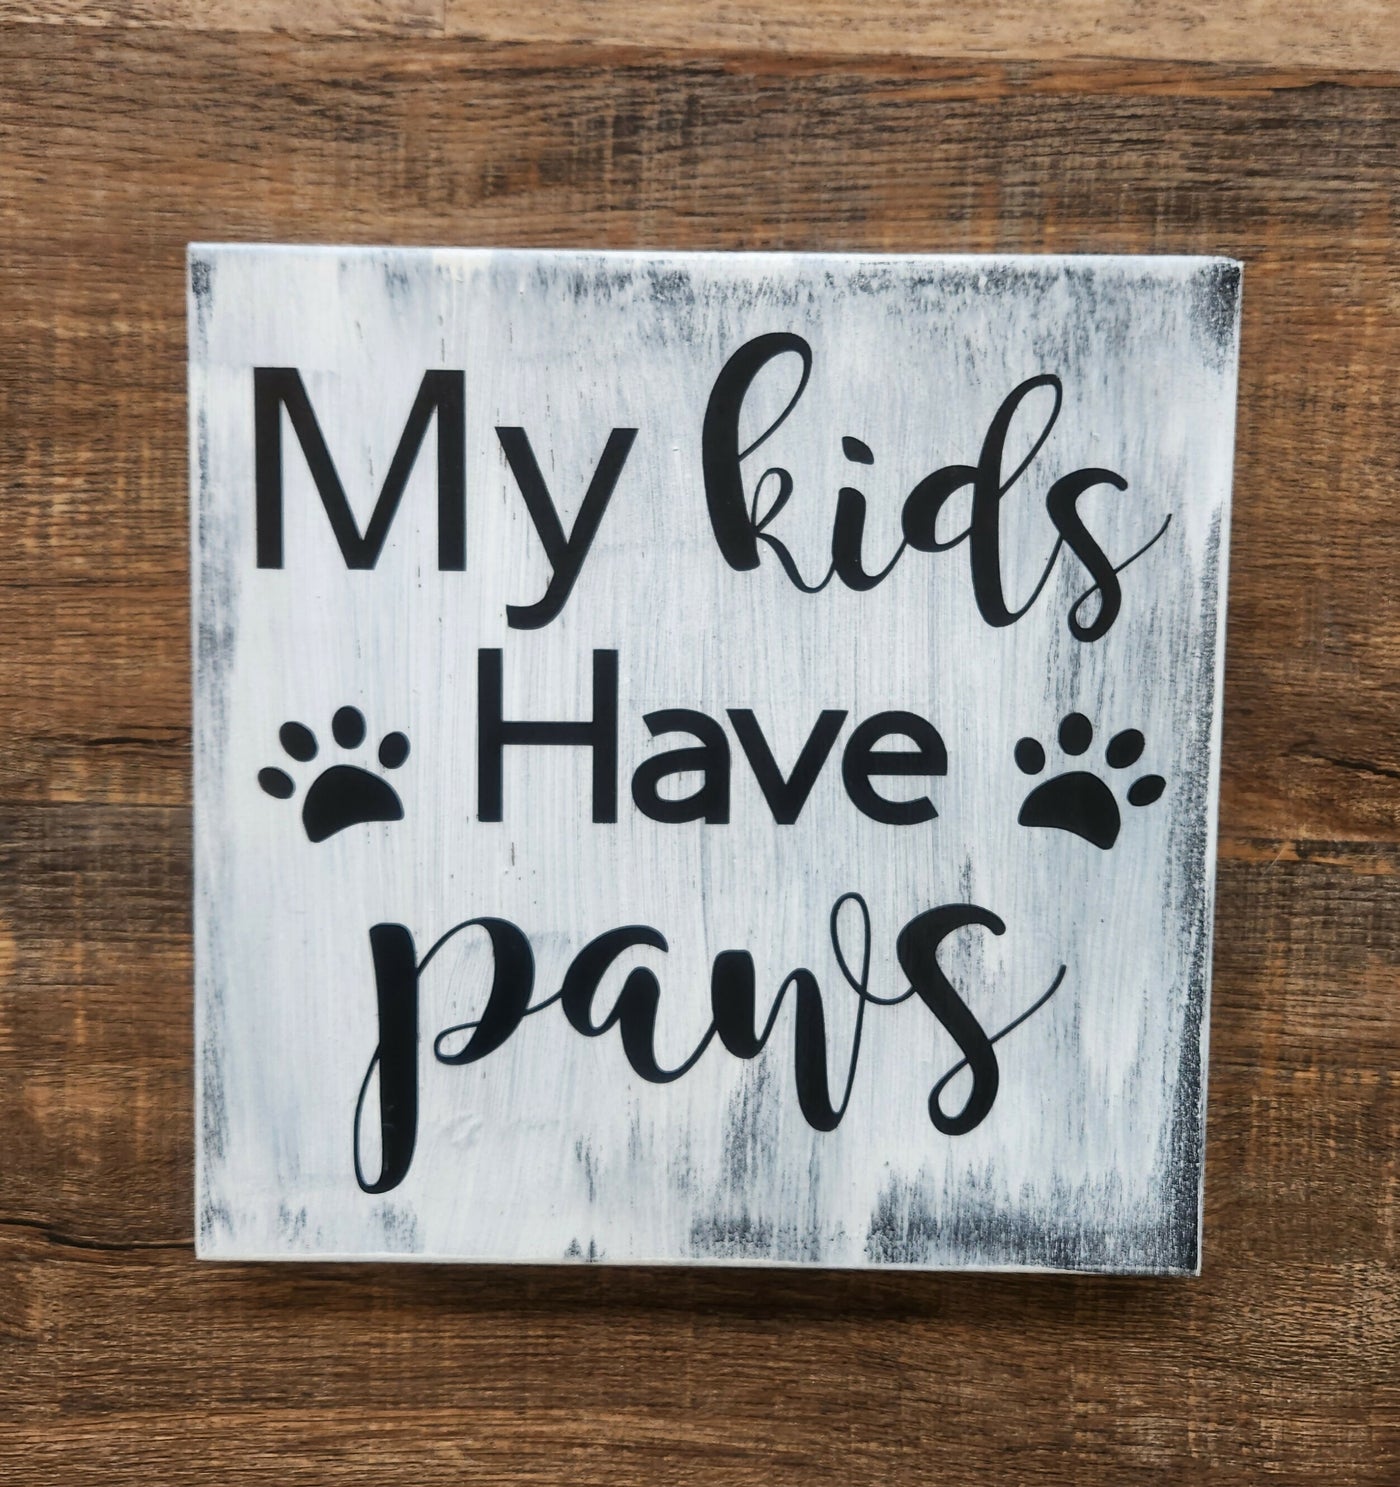 My kids have paws sign